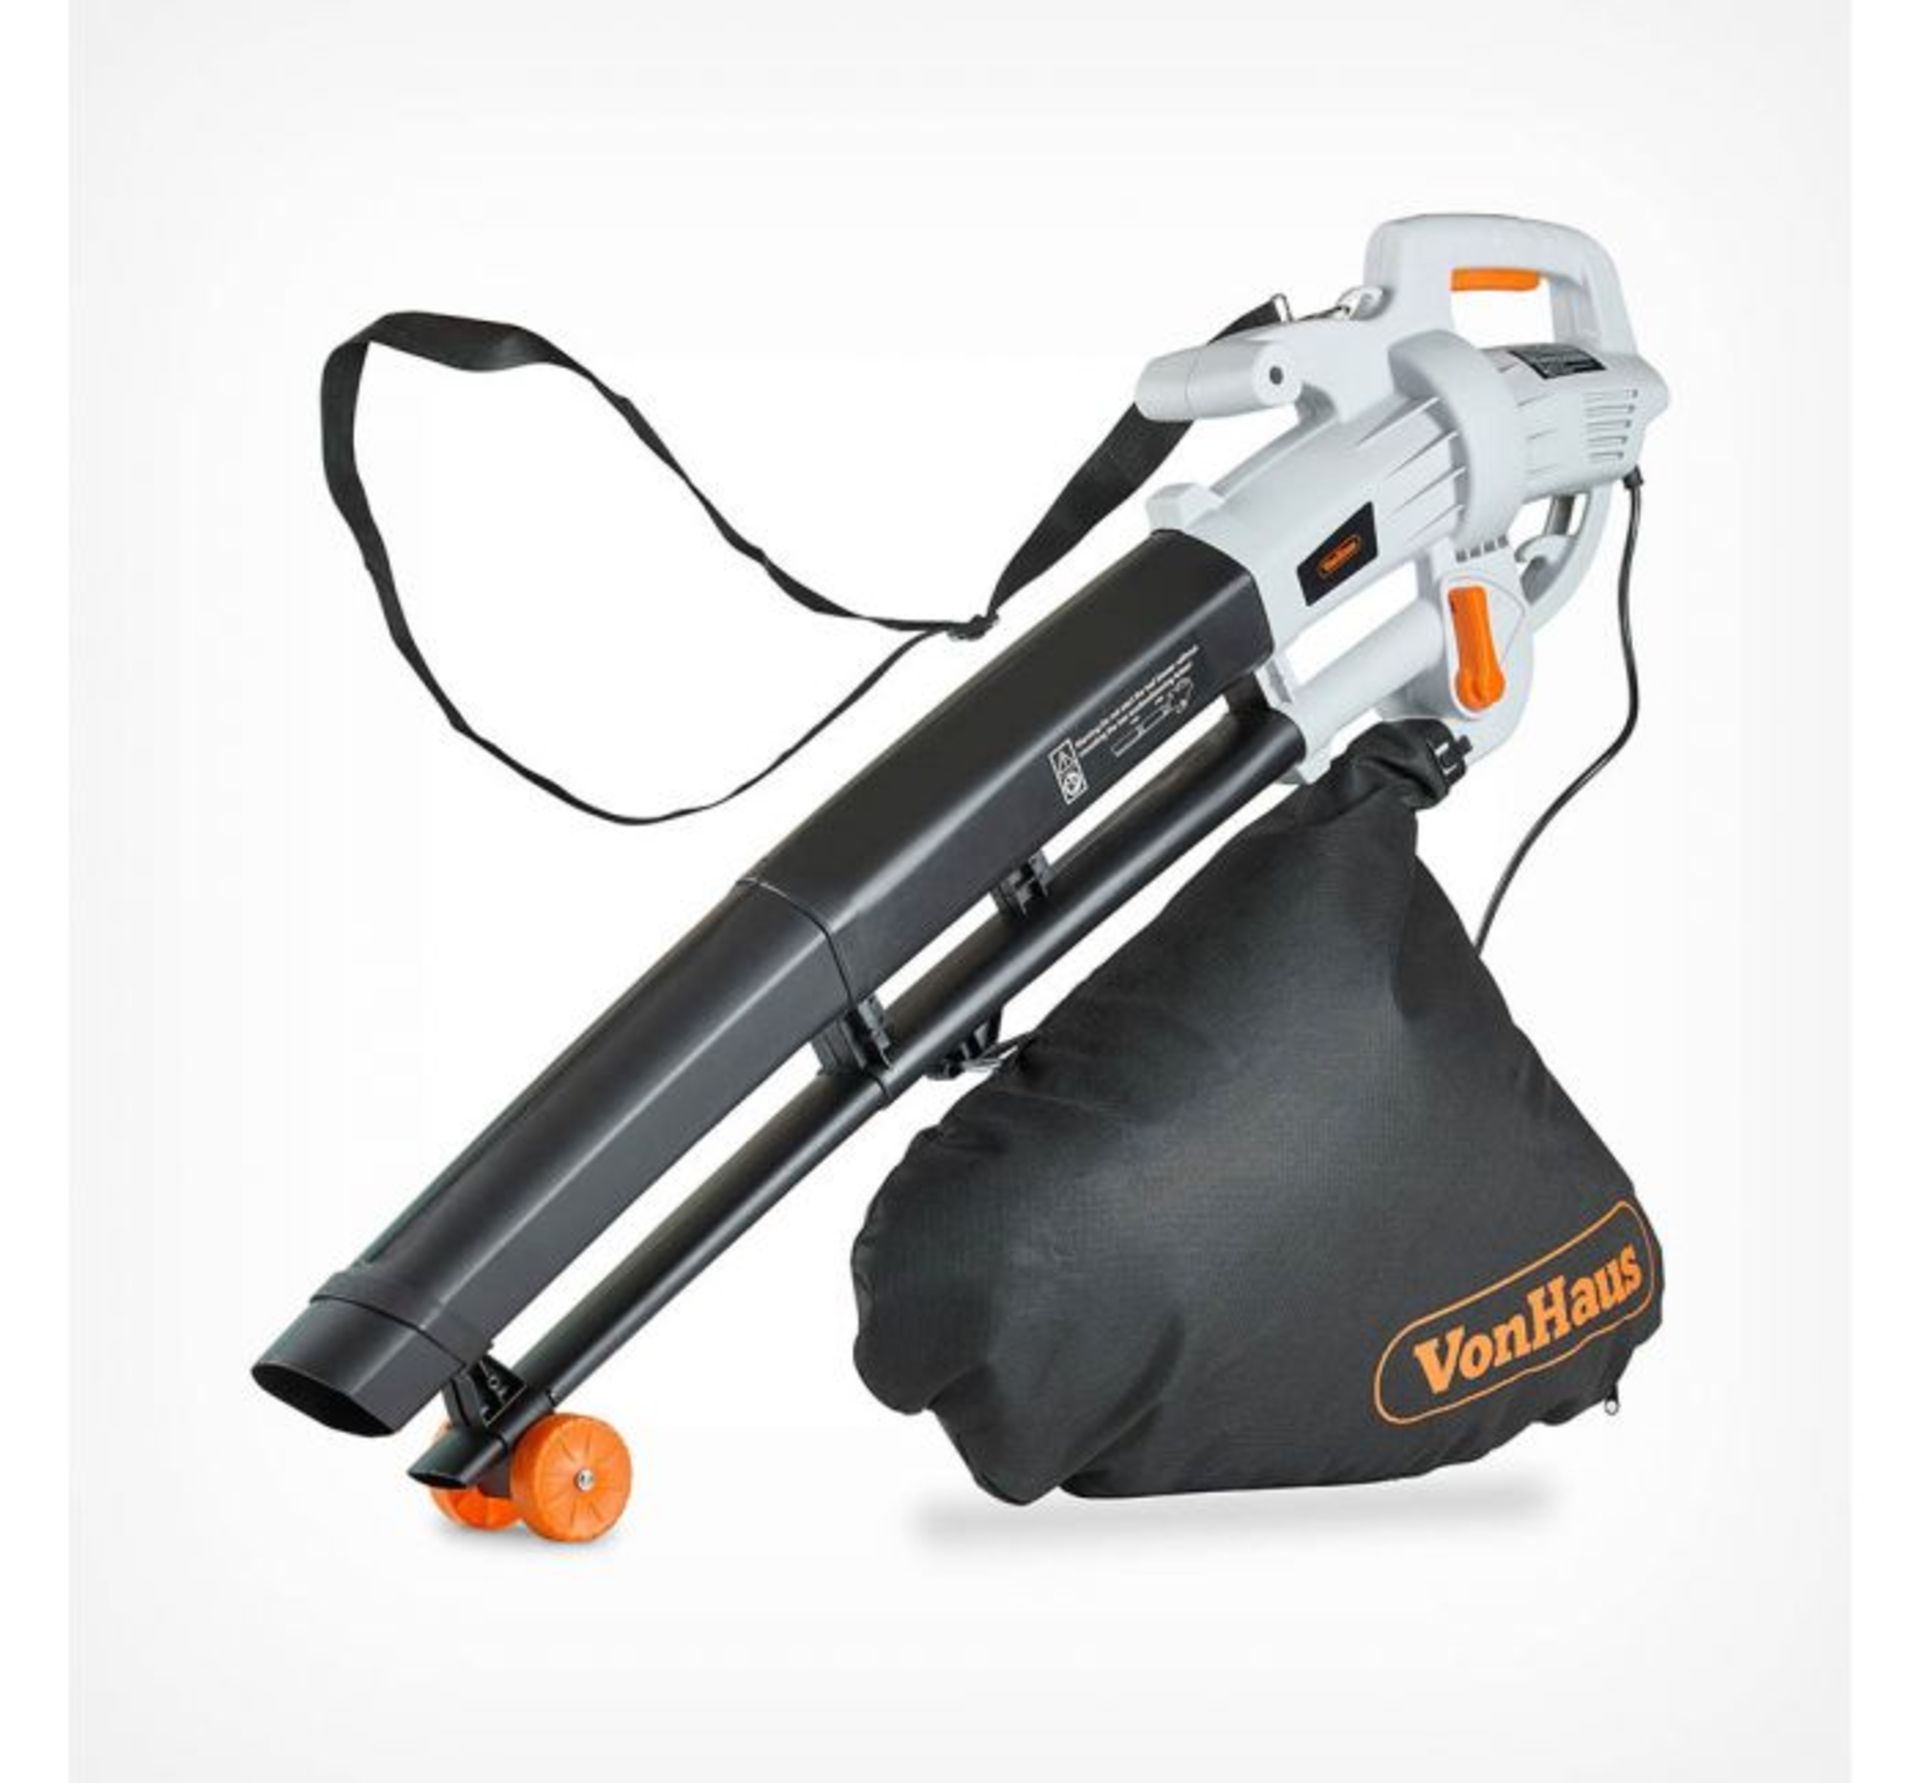 (LT15) 3000W Leaf Blower Powerful 3000W motor blows, vacuums and mulches leaves Automatic mul... - Image 2 of 3